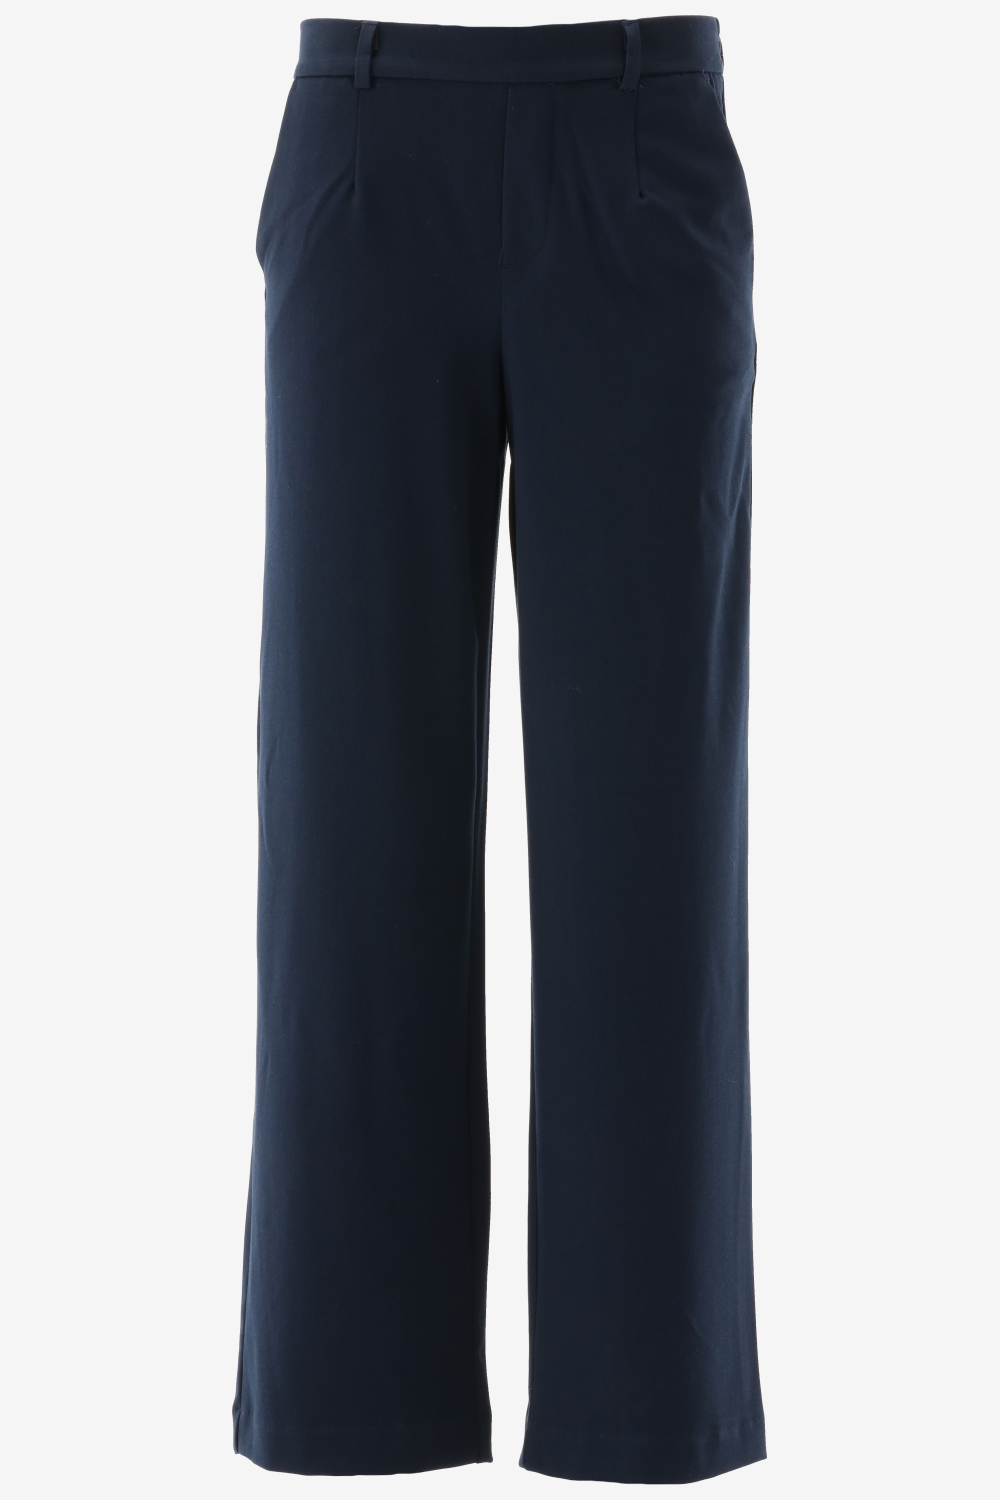 OBJECT COLLECTORS ITEM OBJLISA WIDE PANT NOOS Dames Trousers - Maat 34